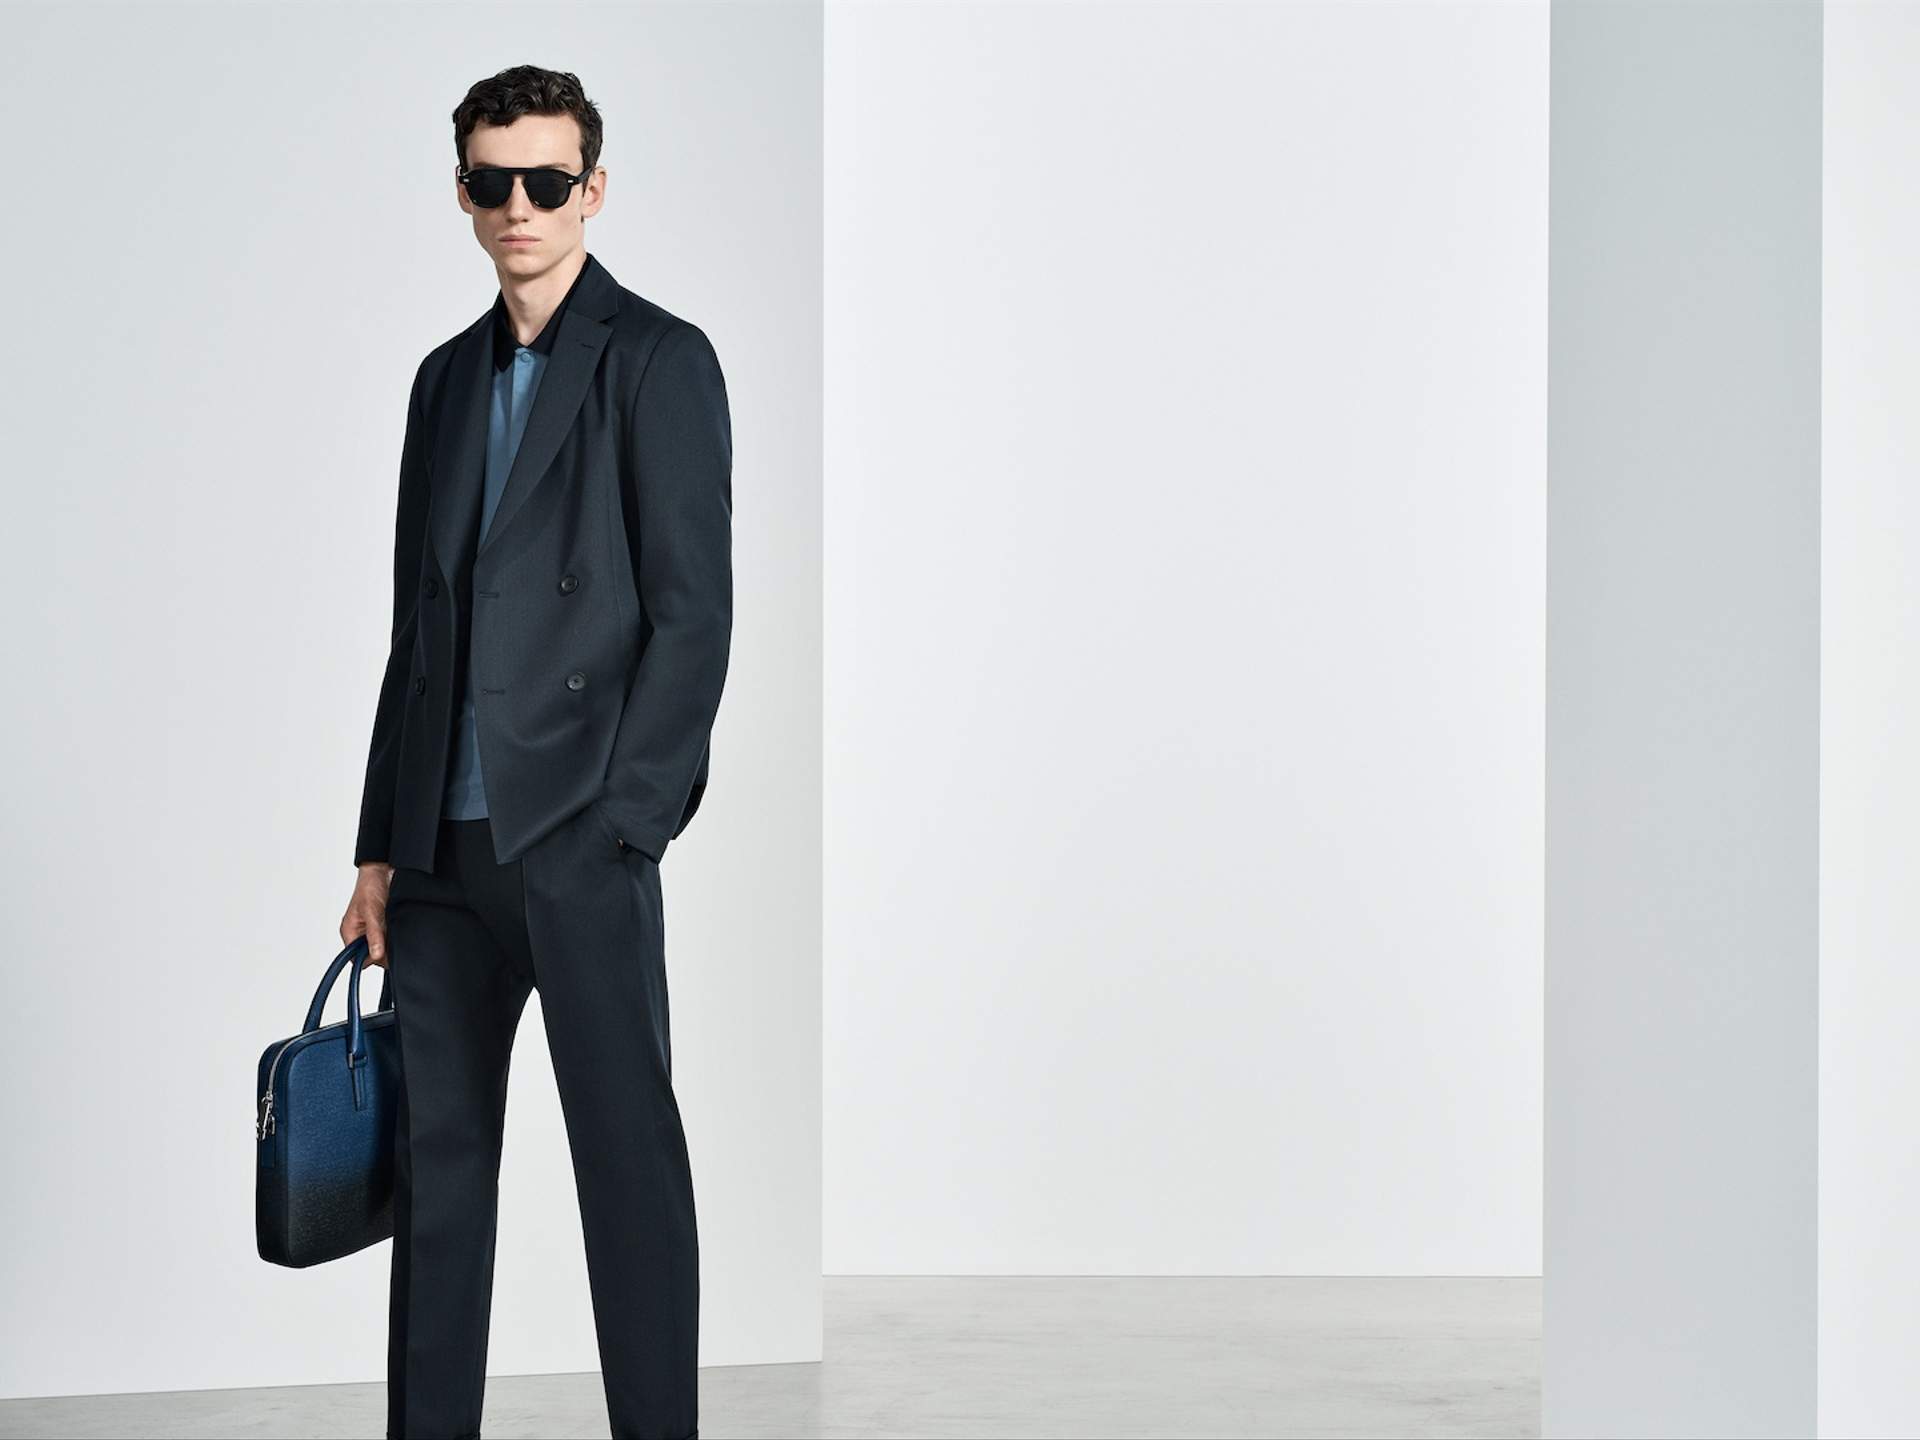 hugo boss suit outlet